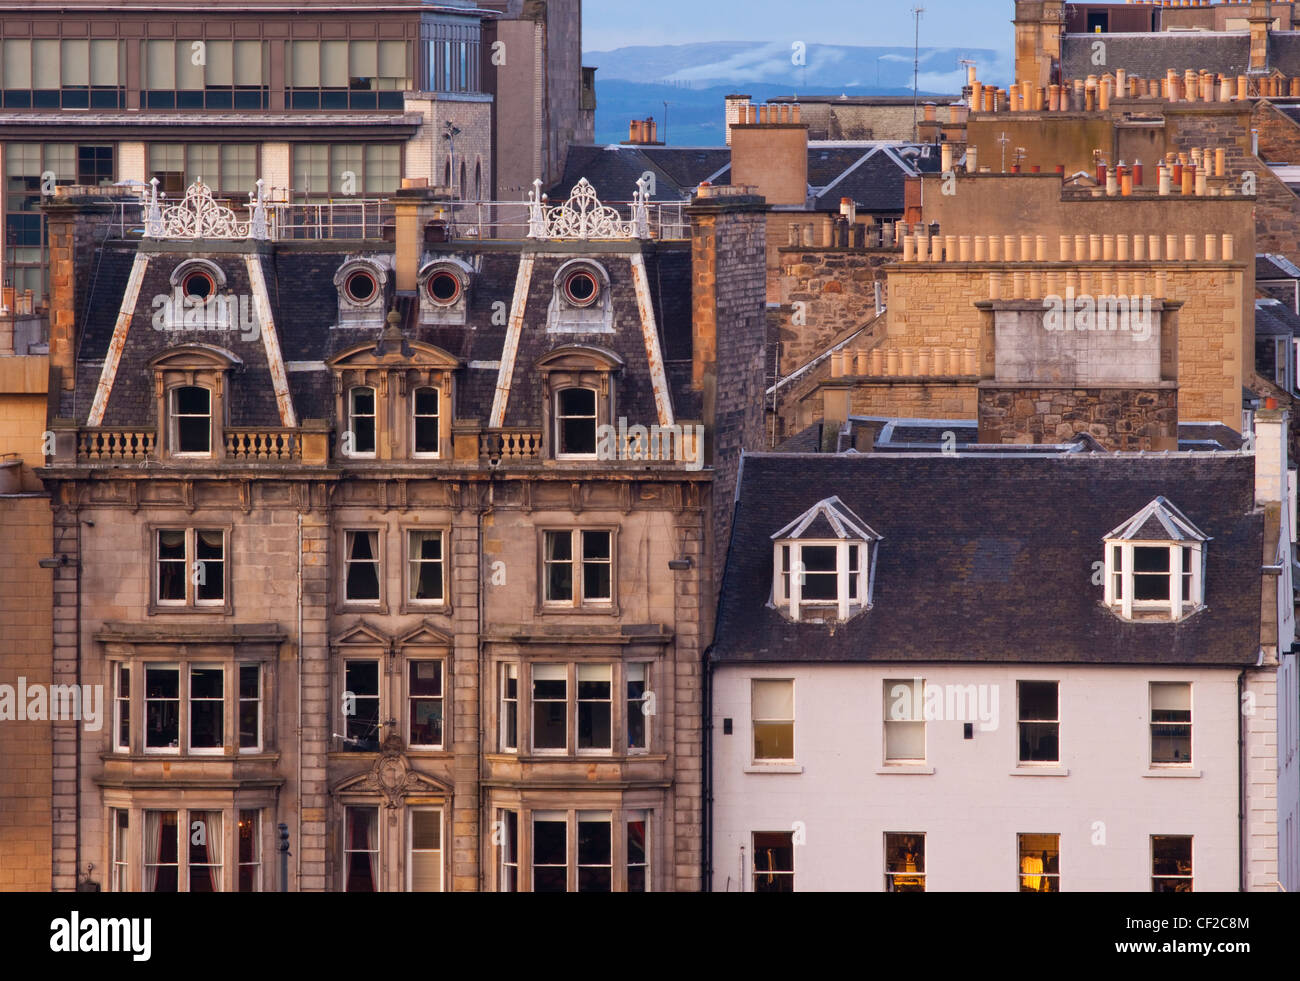 Typical architecture of the shops and offices located along Princes Street. Stock Photo